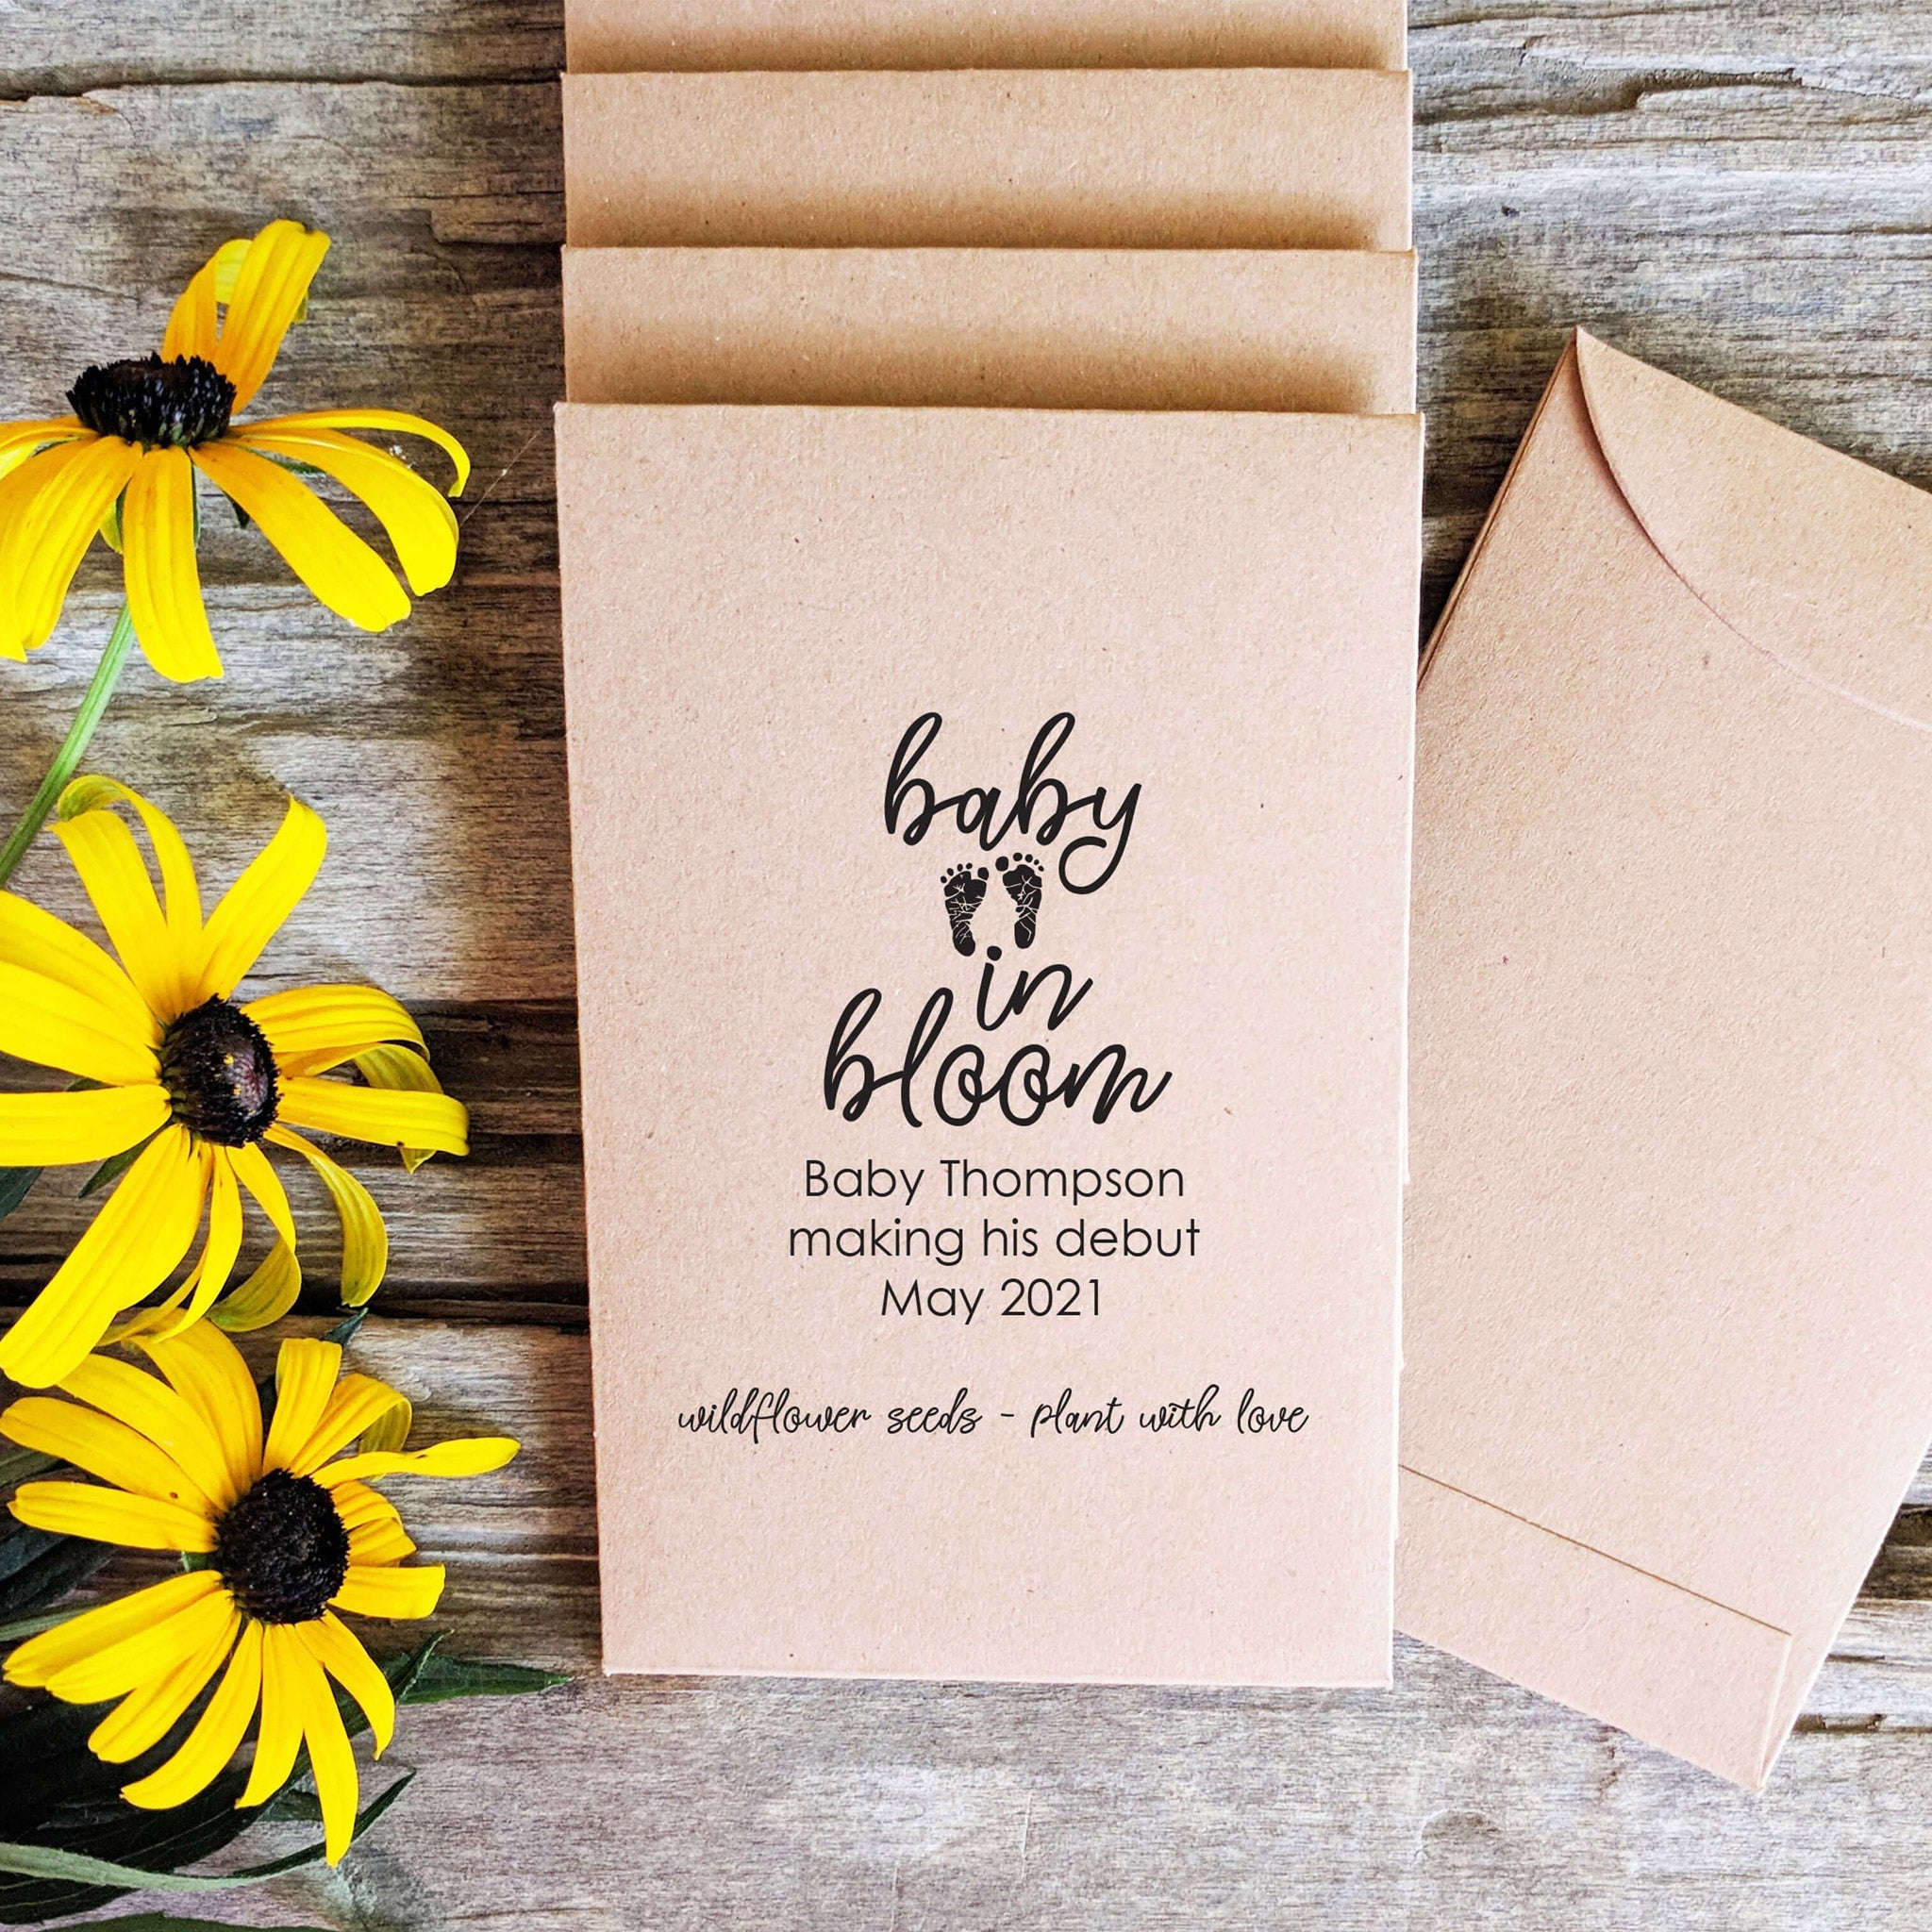 Baby Shower Favor - Baby in Bloom Seed Packets